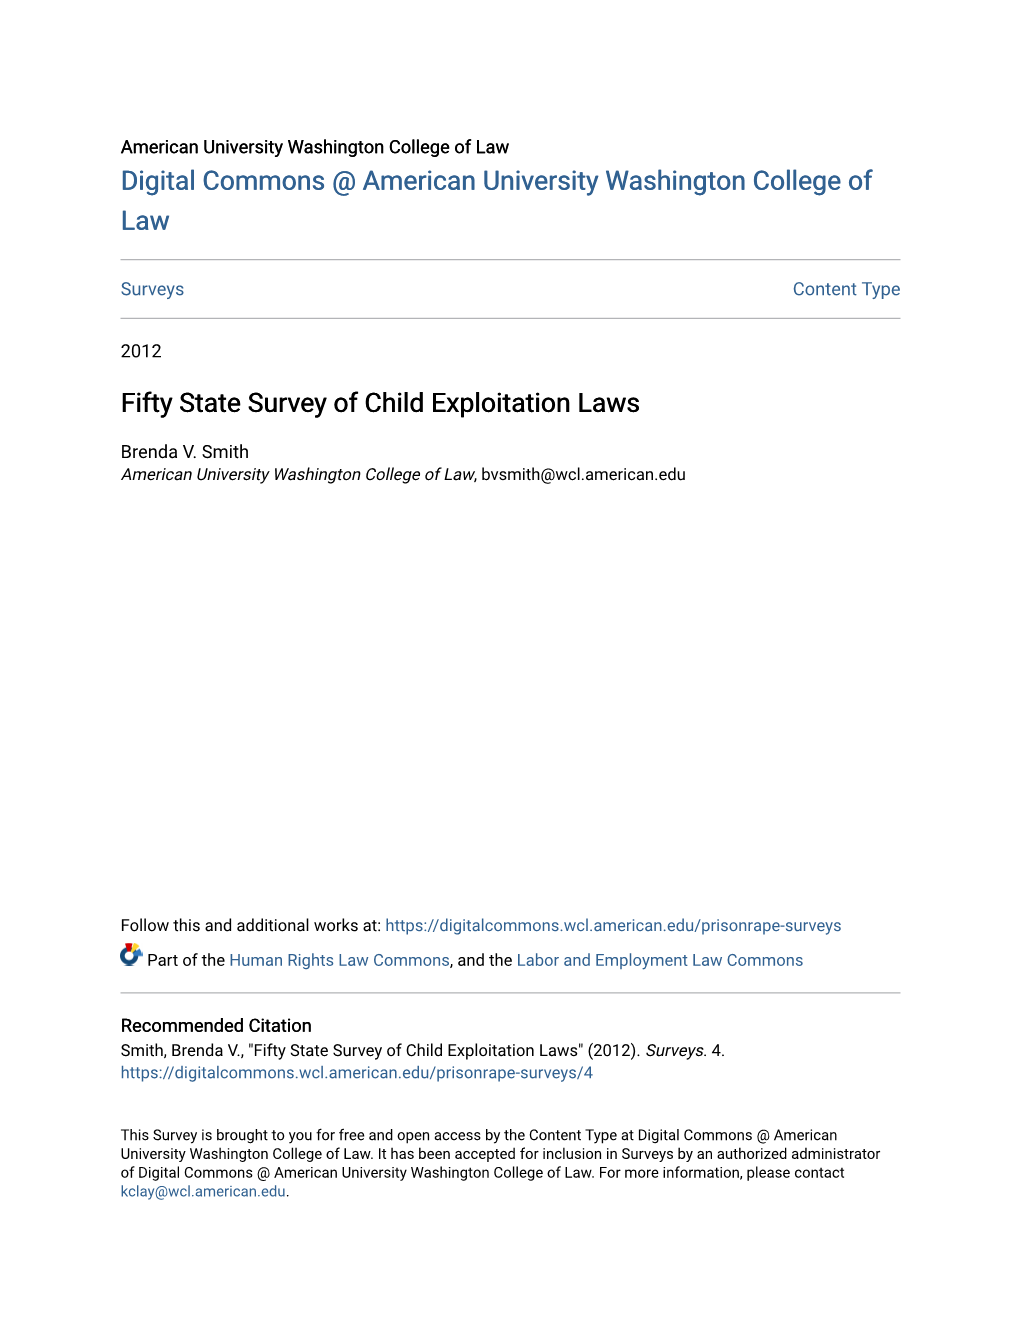 Fifty State Survey of Child Exploitation Laws